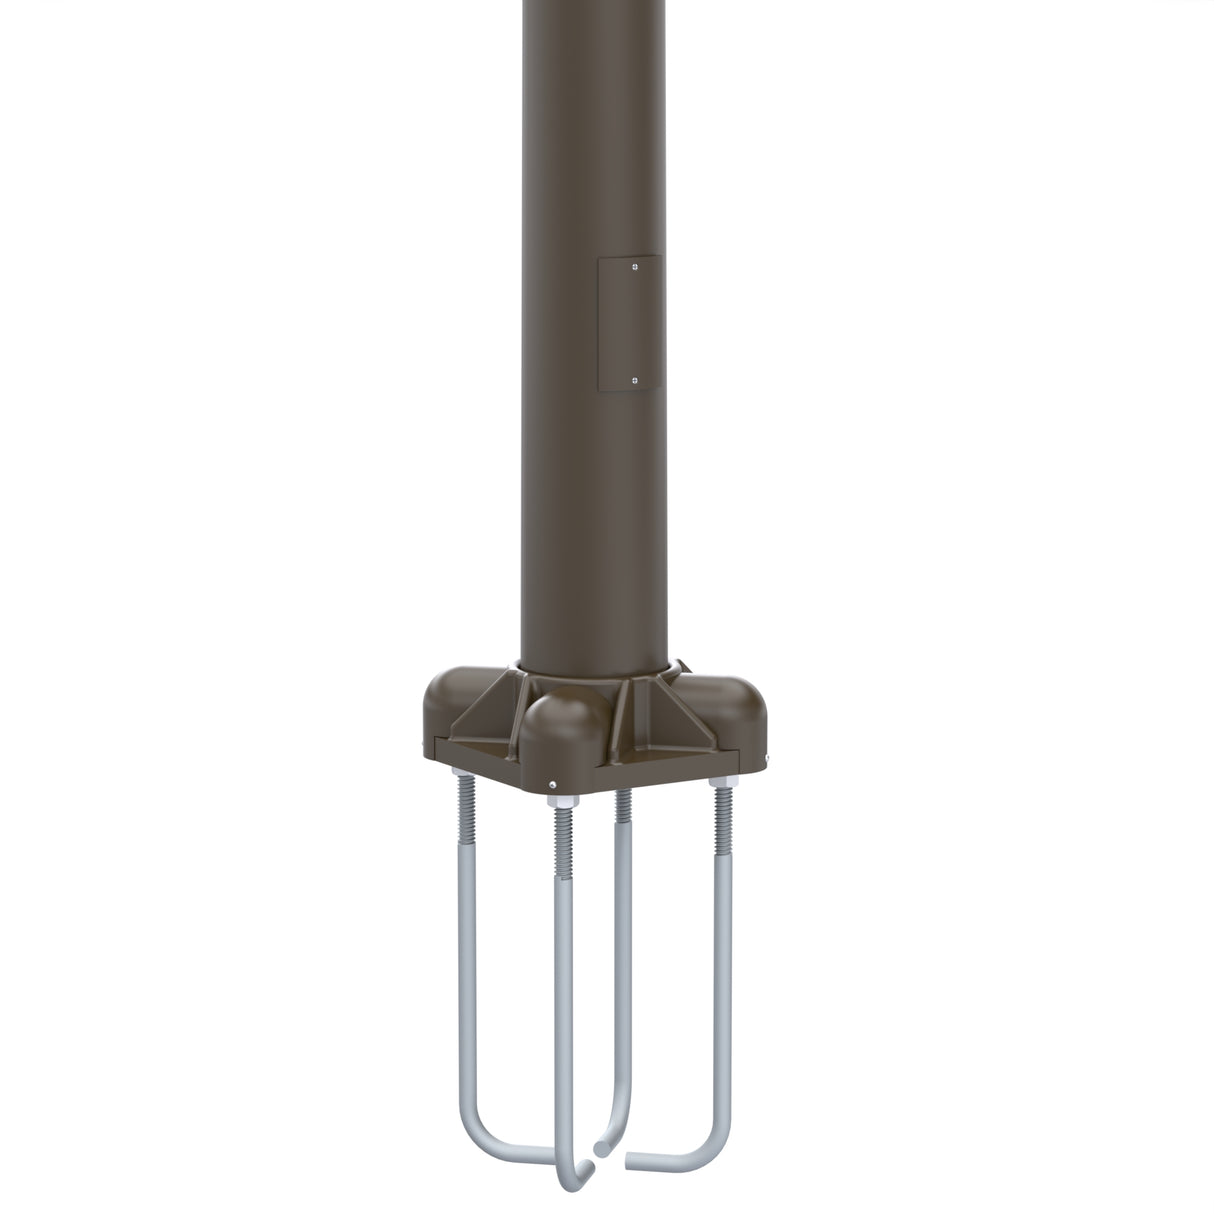 35' Tall x 8.0" Base OD x 4.5" Top OD x 0.250" Thick, Round Tapered Aluminum, Anchor Base Light Pole with 10' Davit Arm